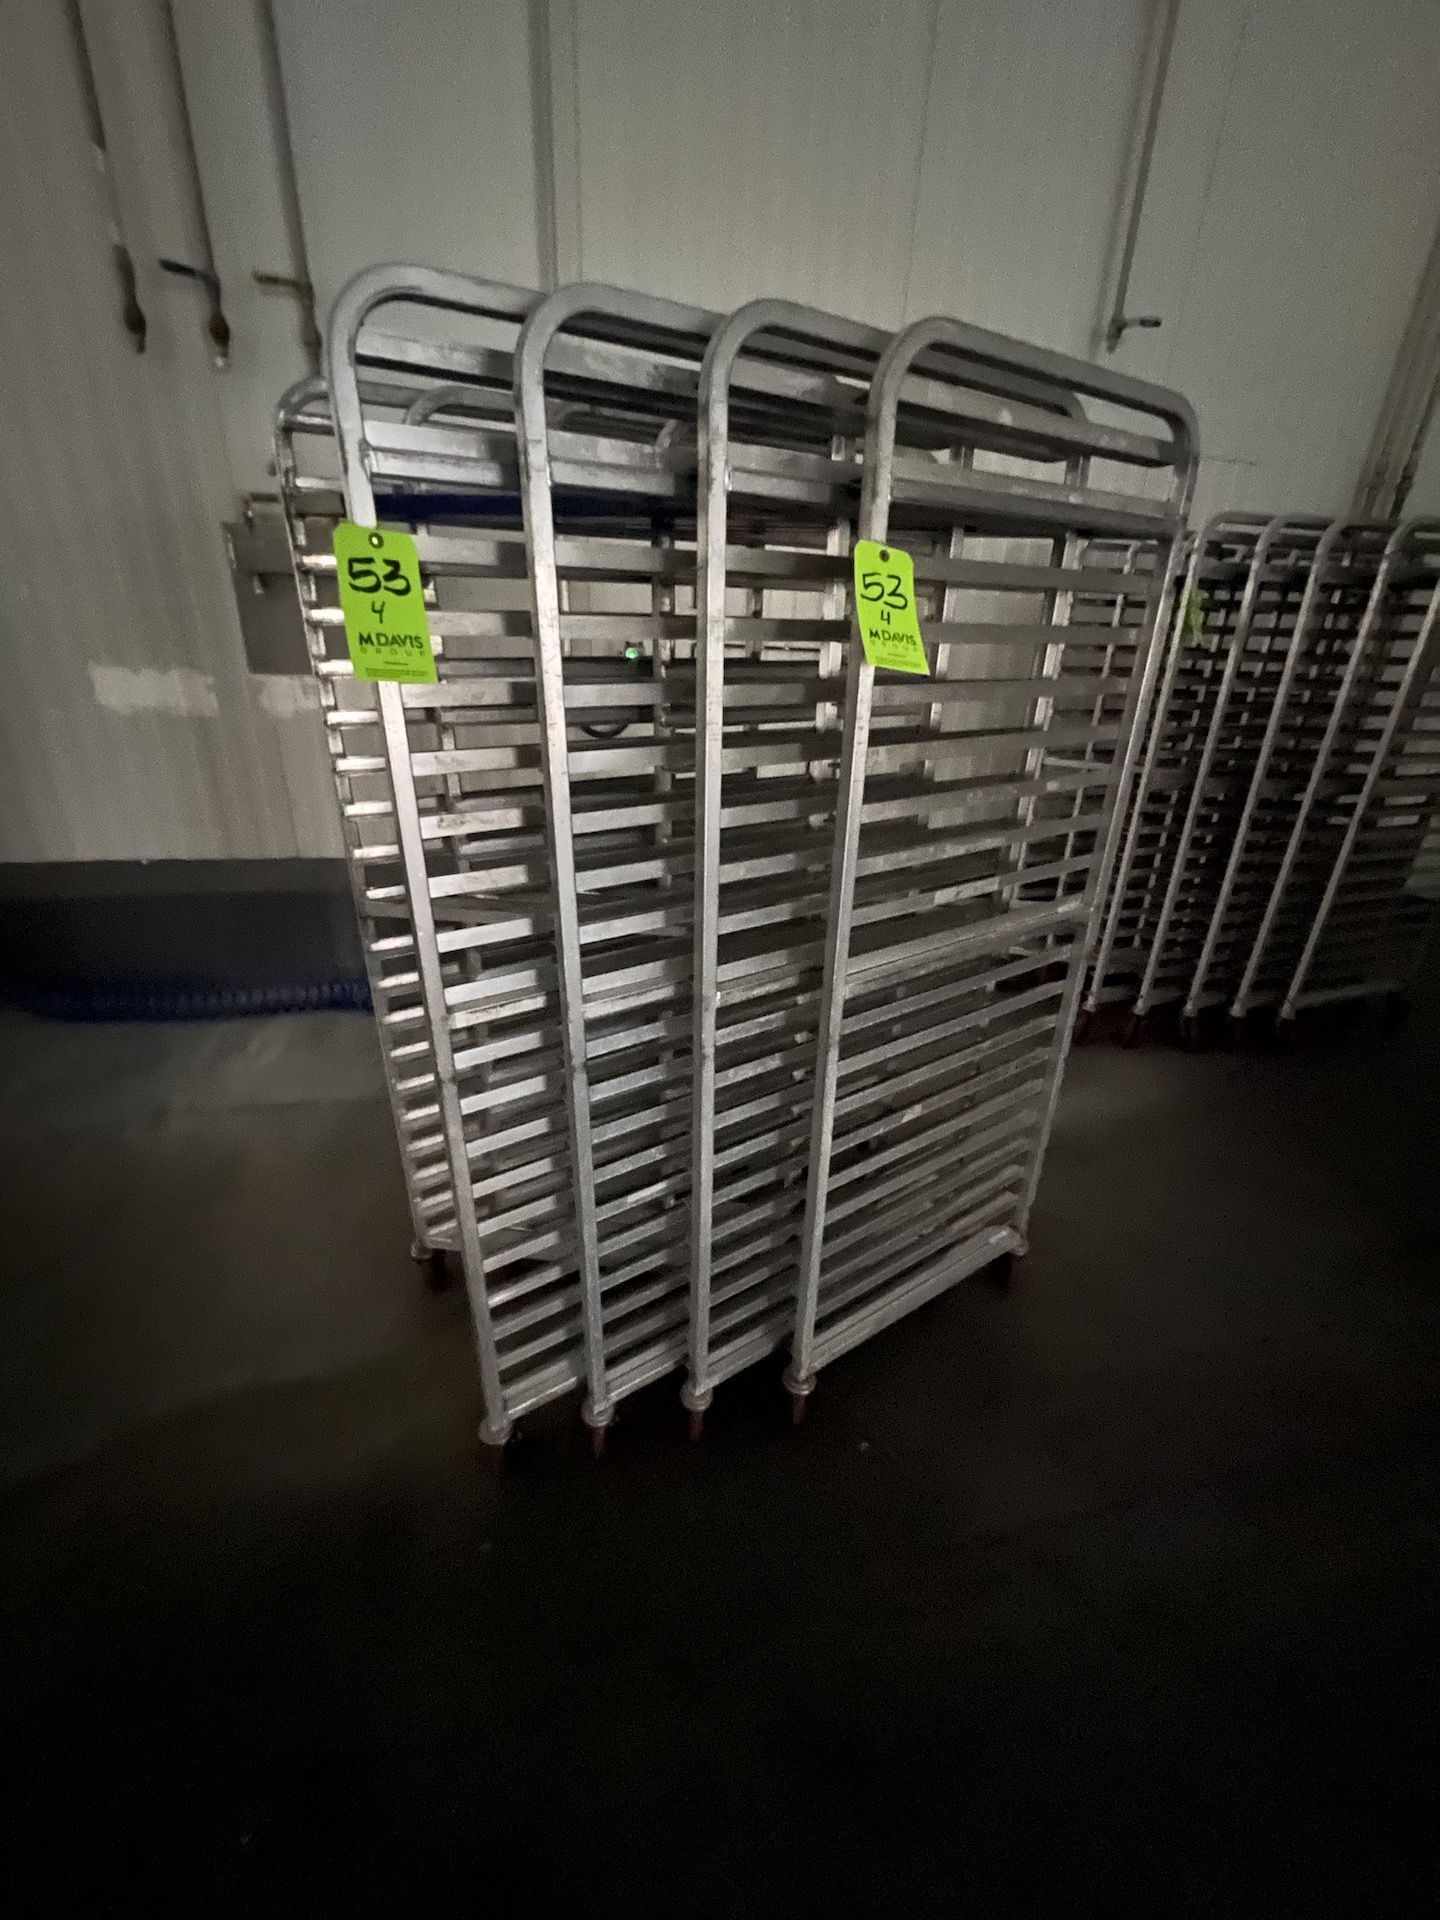 (4) NESTING BUN / SHEET PAN RACKS (RIGGING & SIMPLE LOADING FEE $40.00) (NOTE: DOES NOT INCLUDE